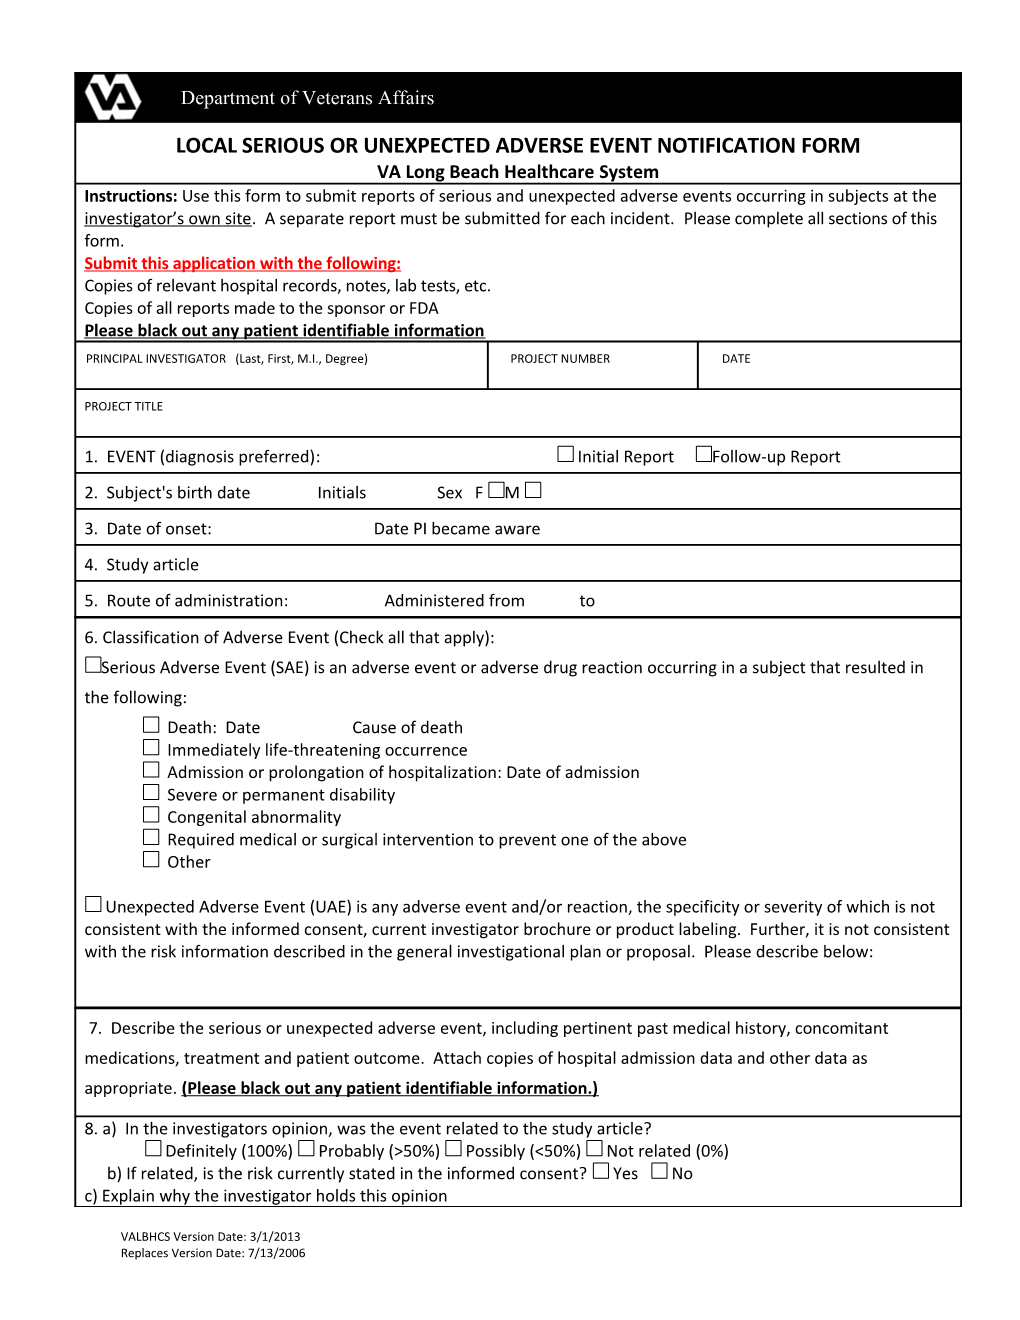 Local Serious Or Unexpected Adverse Event Notification Form